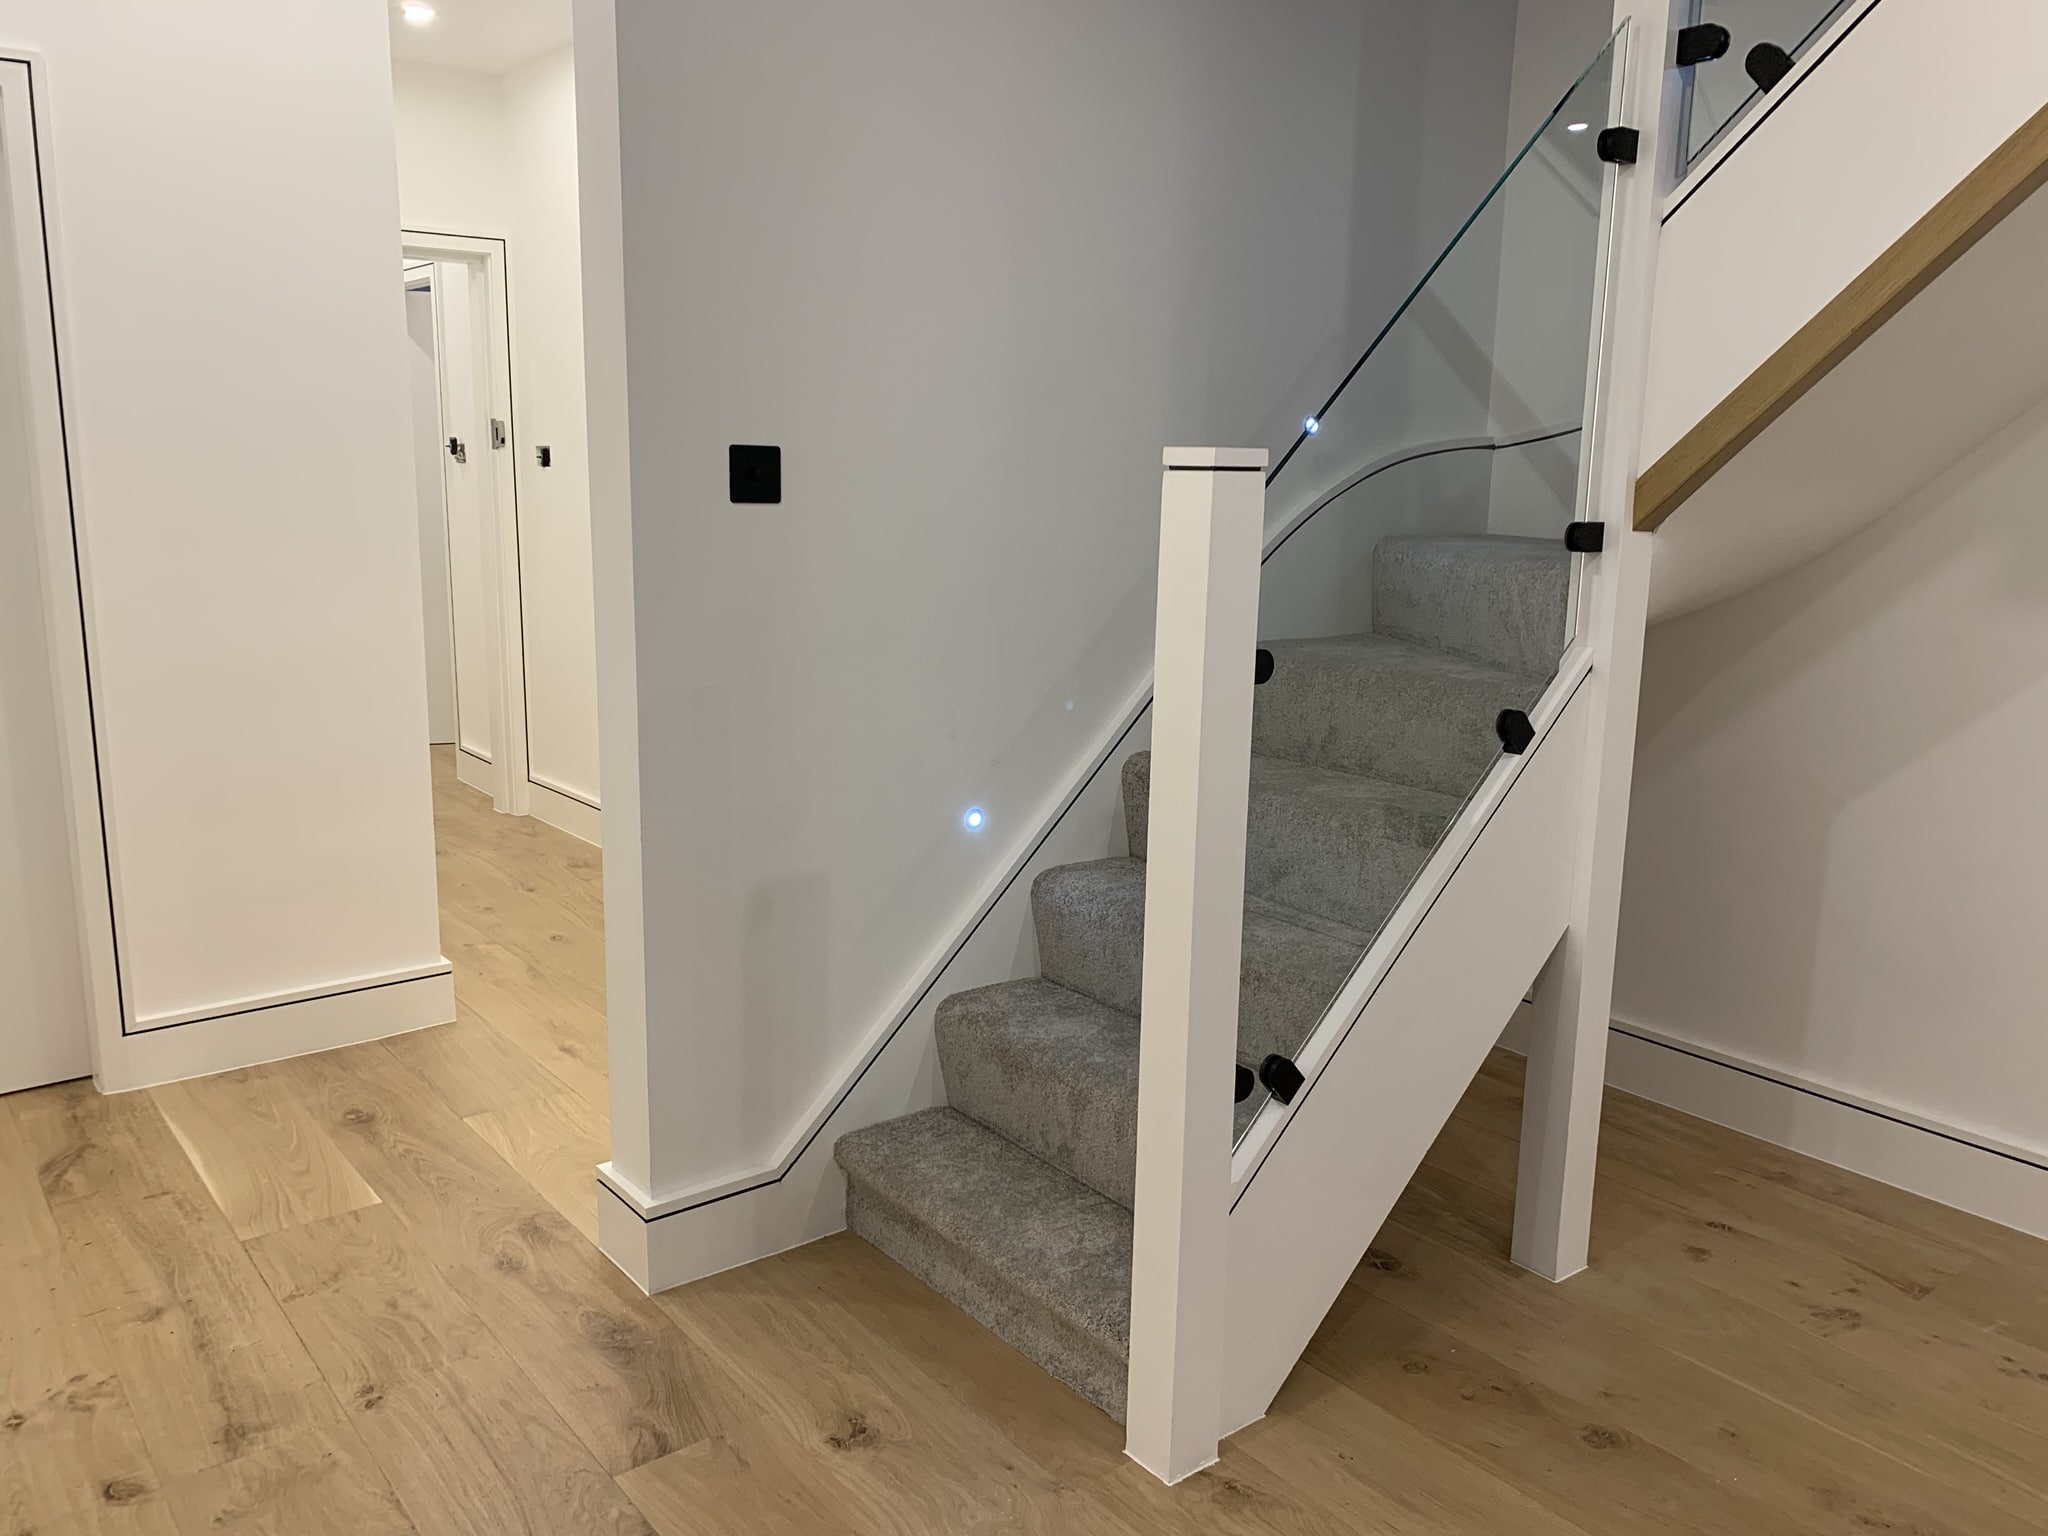 Staircase with carpet cover and toughened safety glass balustrade.